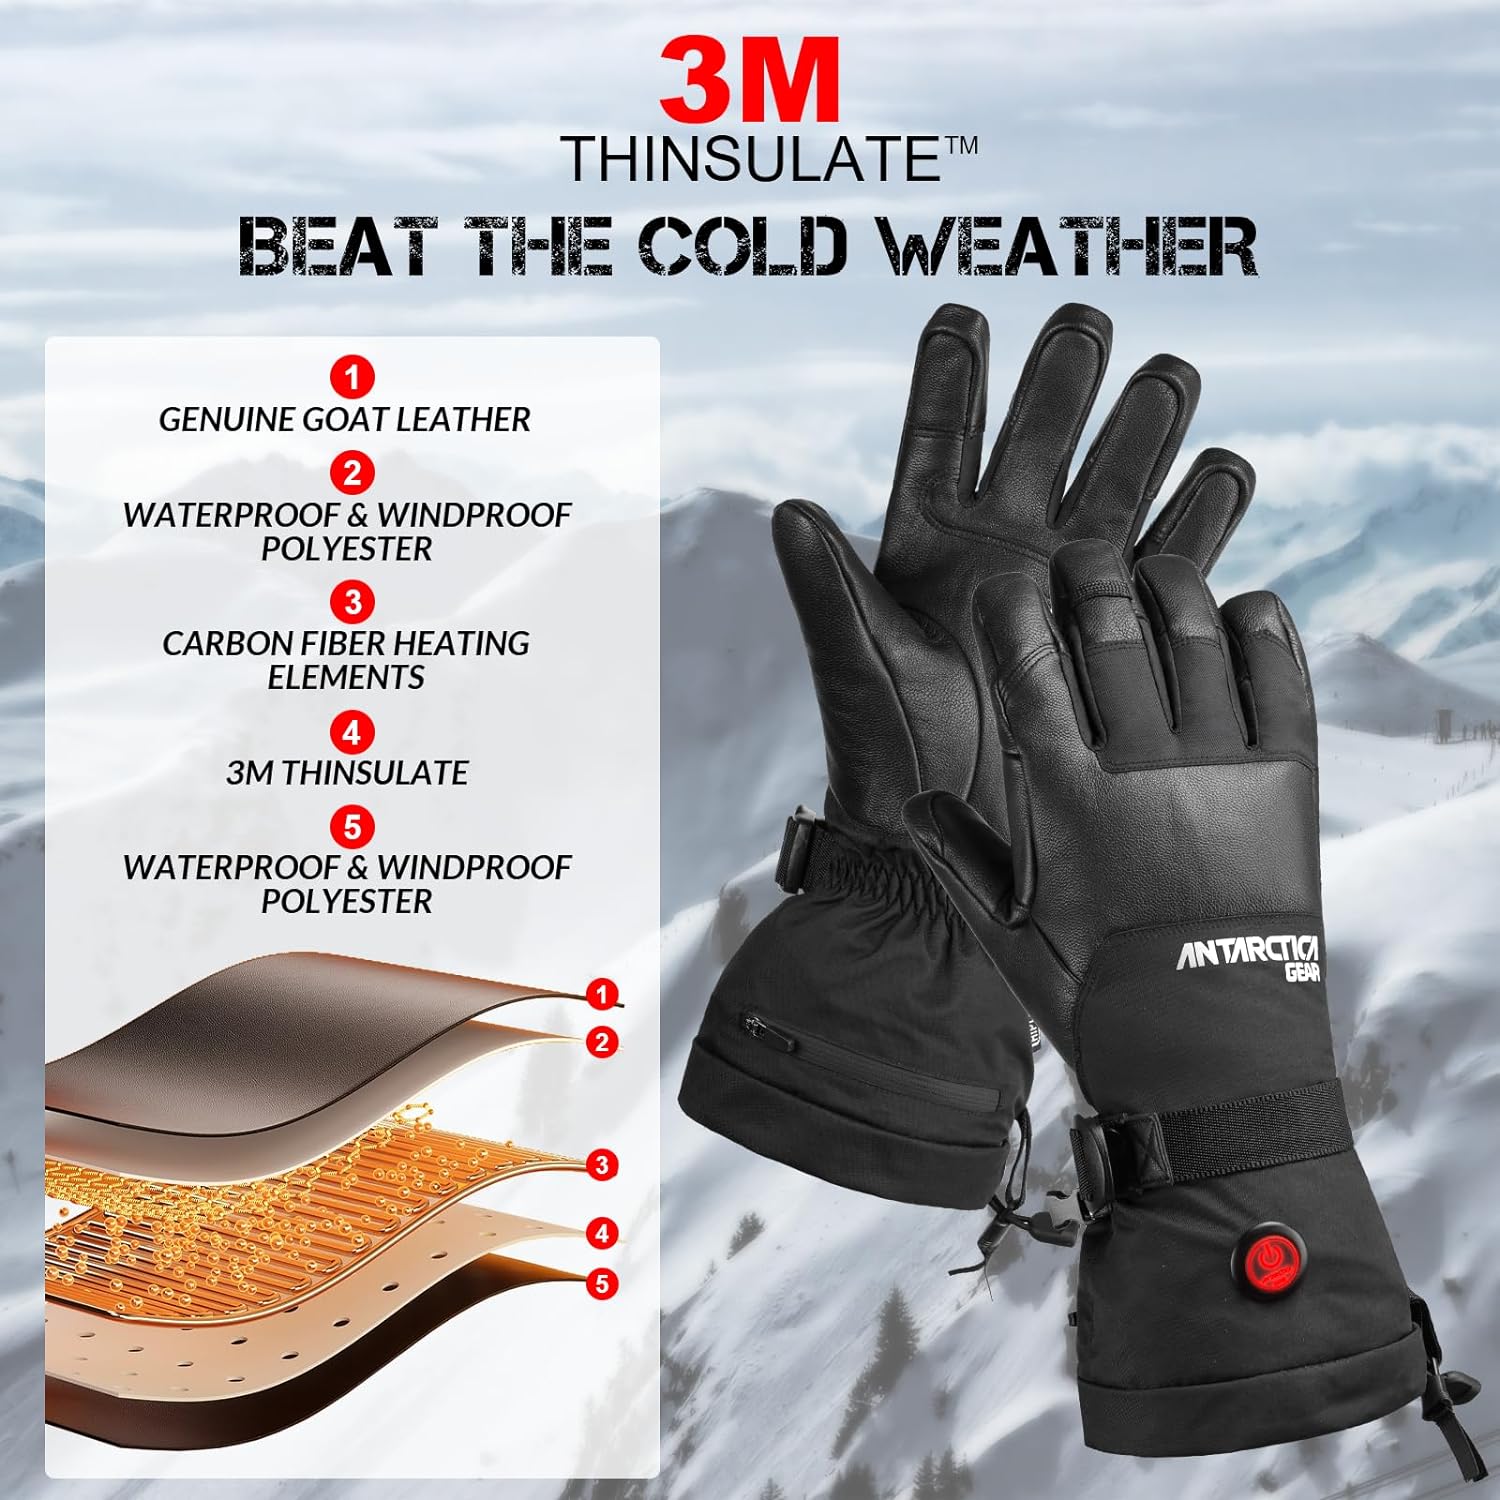 ANTARCTICA GEAR Winter Ski Gloves Rechargeable Heating Warm Gloves for Motorcycle